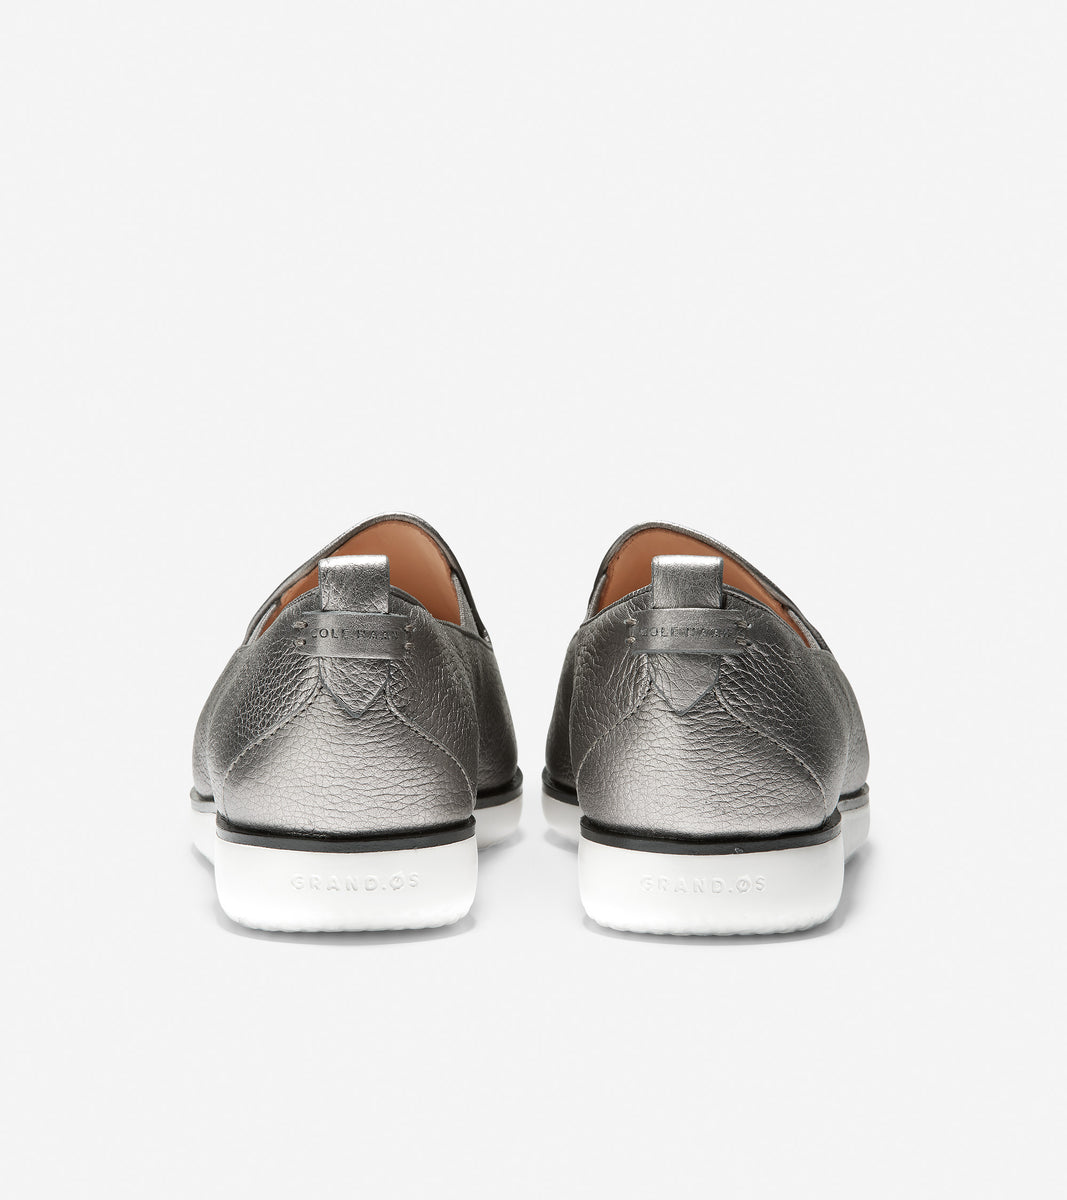 ColeHaan-Grand Ambition Slip-On Sneaker-w15520-Metallic Tumbled Leather